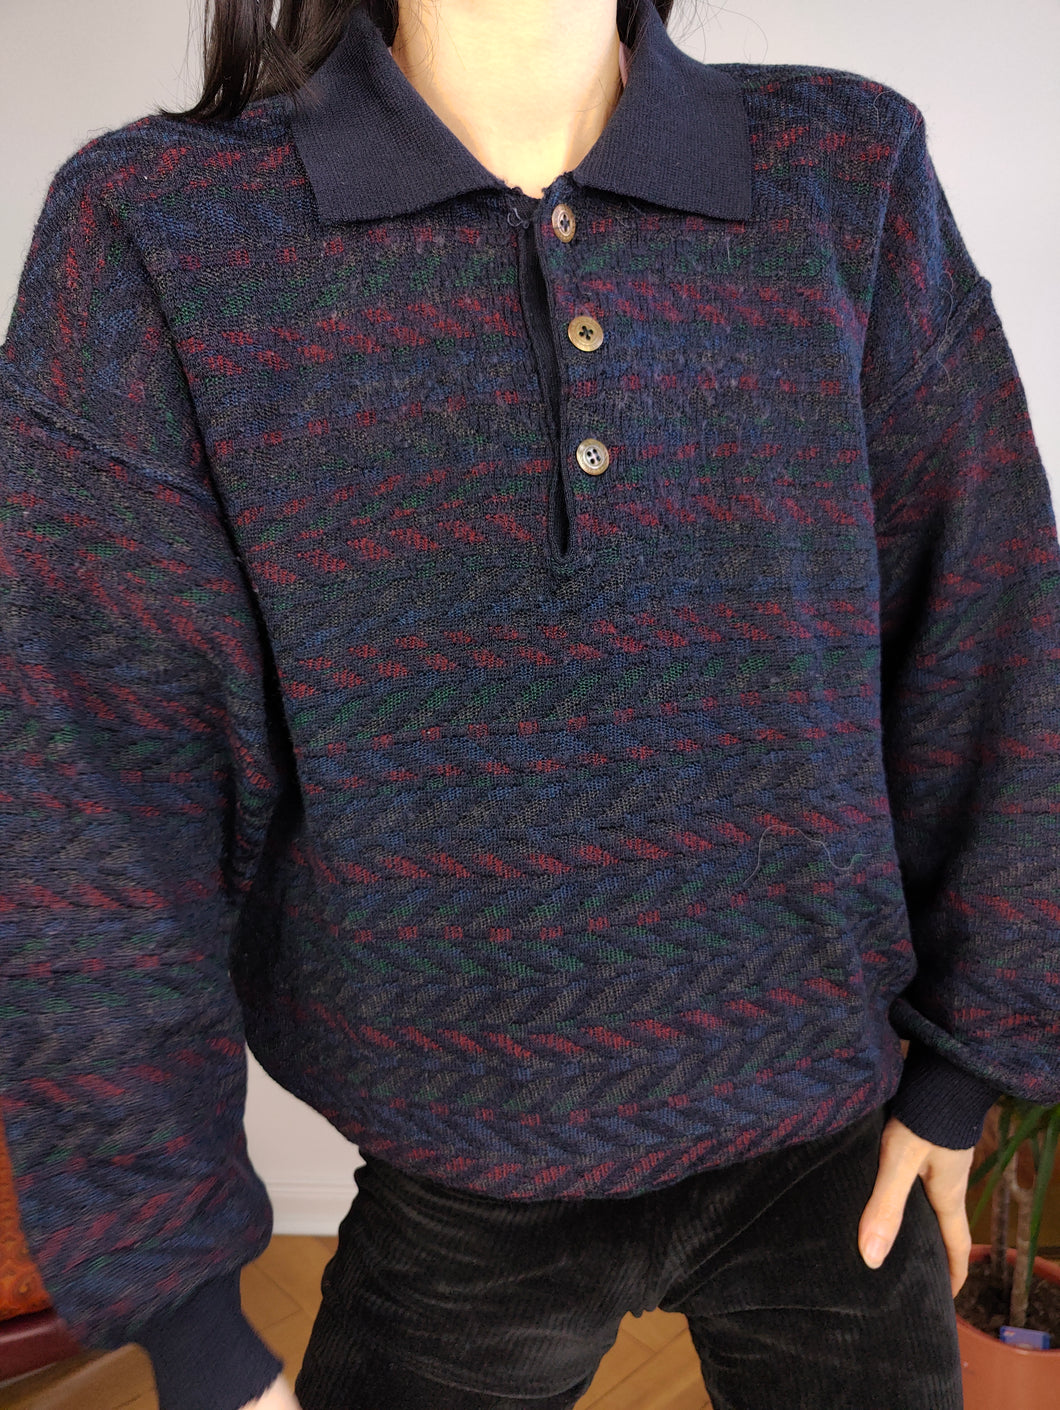 Vintage merino wool polo collar sweater knit pullover jumper navy blue pattern Monecatini S-M